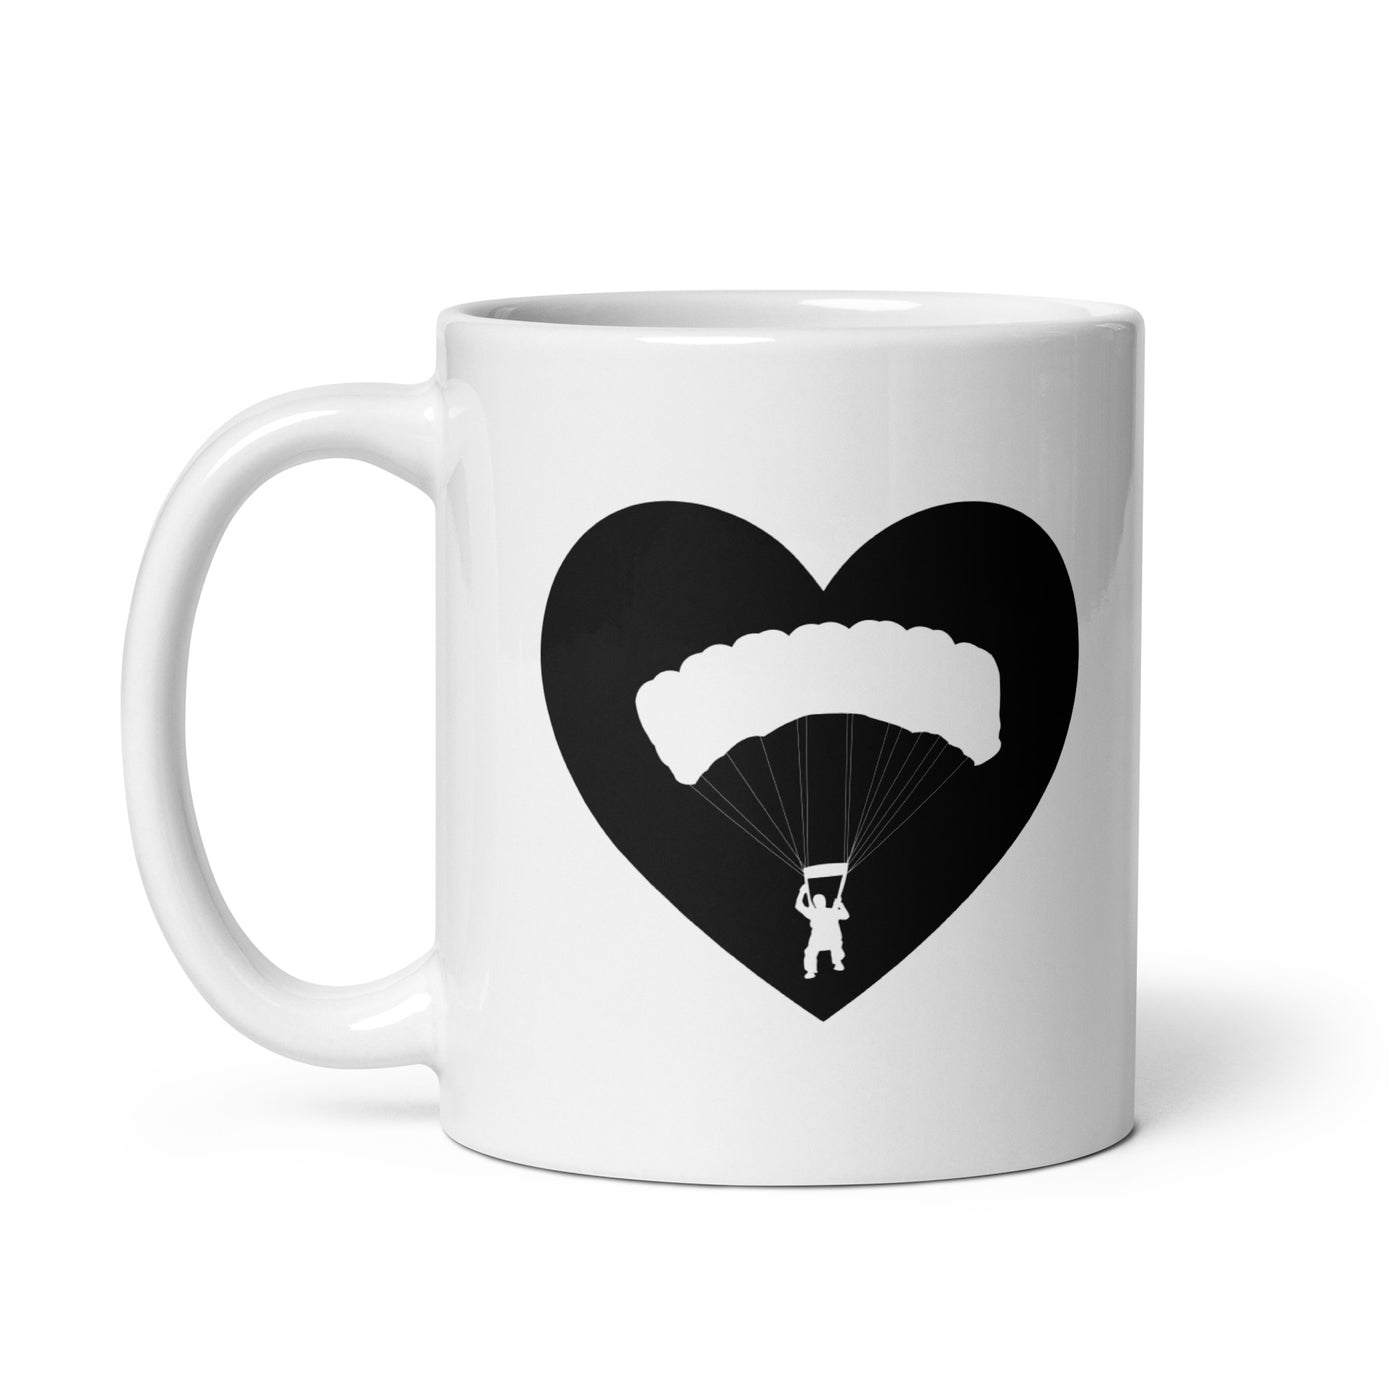 Heart 1 And Paragliding - Tasse berge 11oz